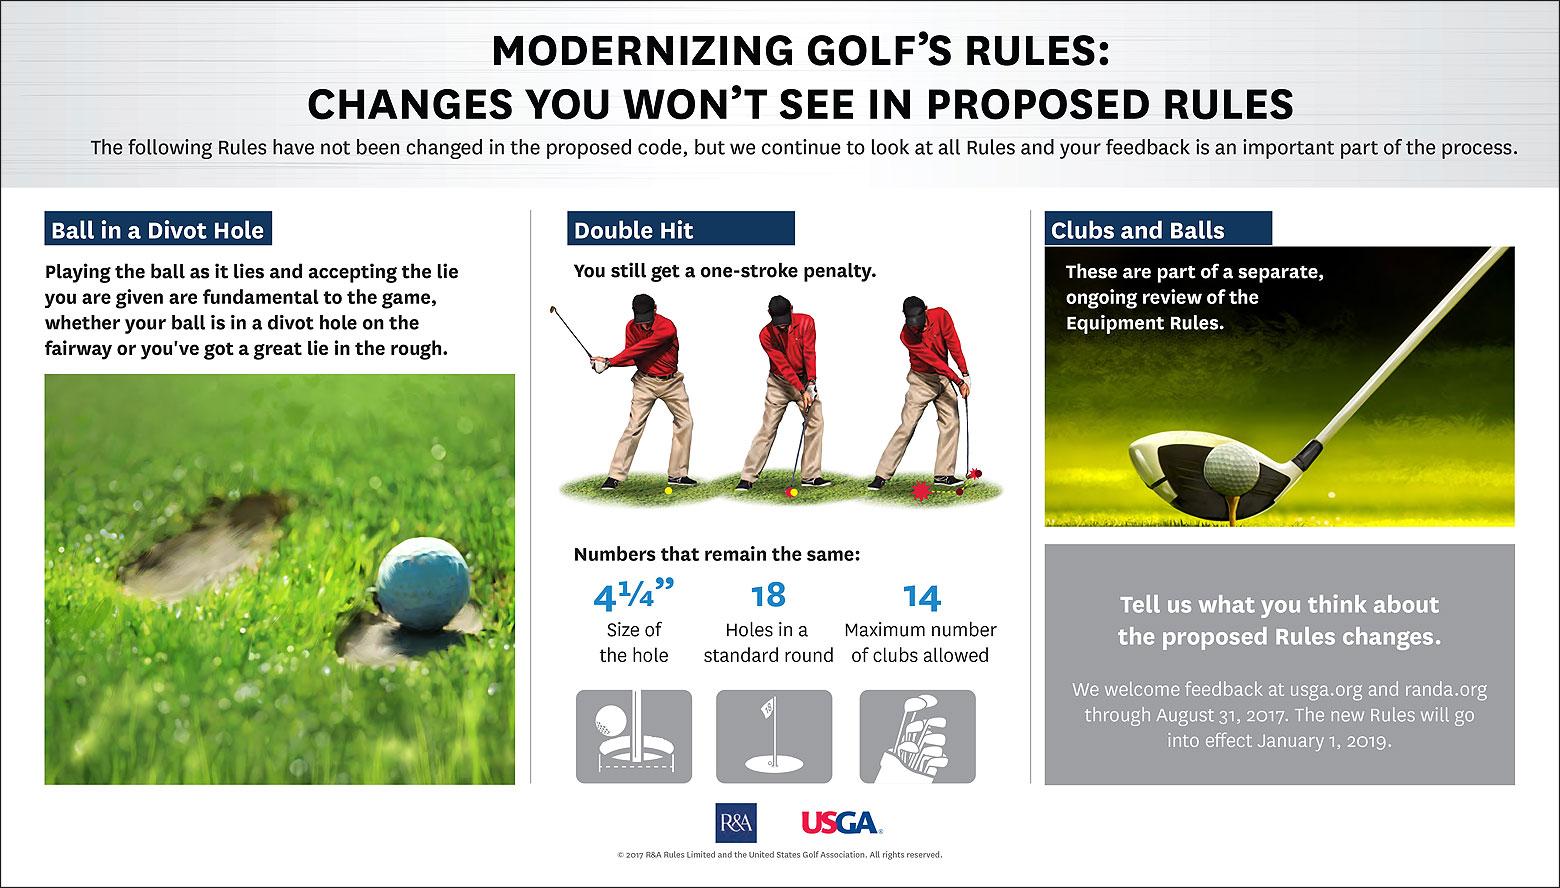 USGA and R&A announce proposed changes to modernize golf’s Rules; asking for feedback Pacific